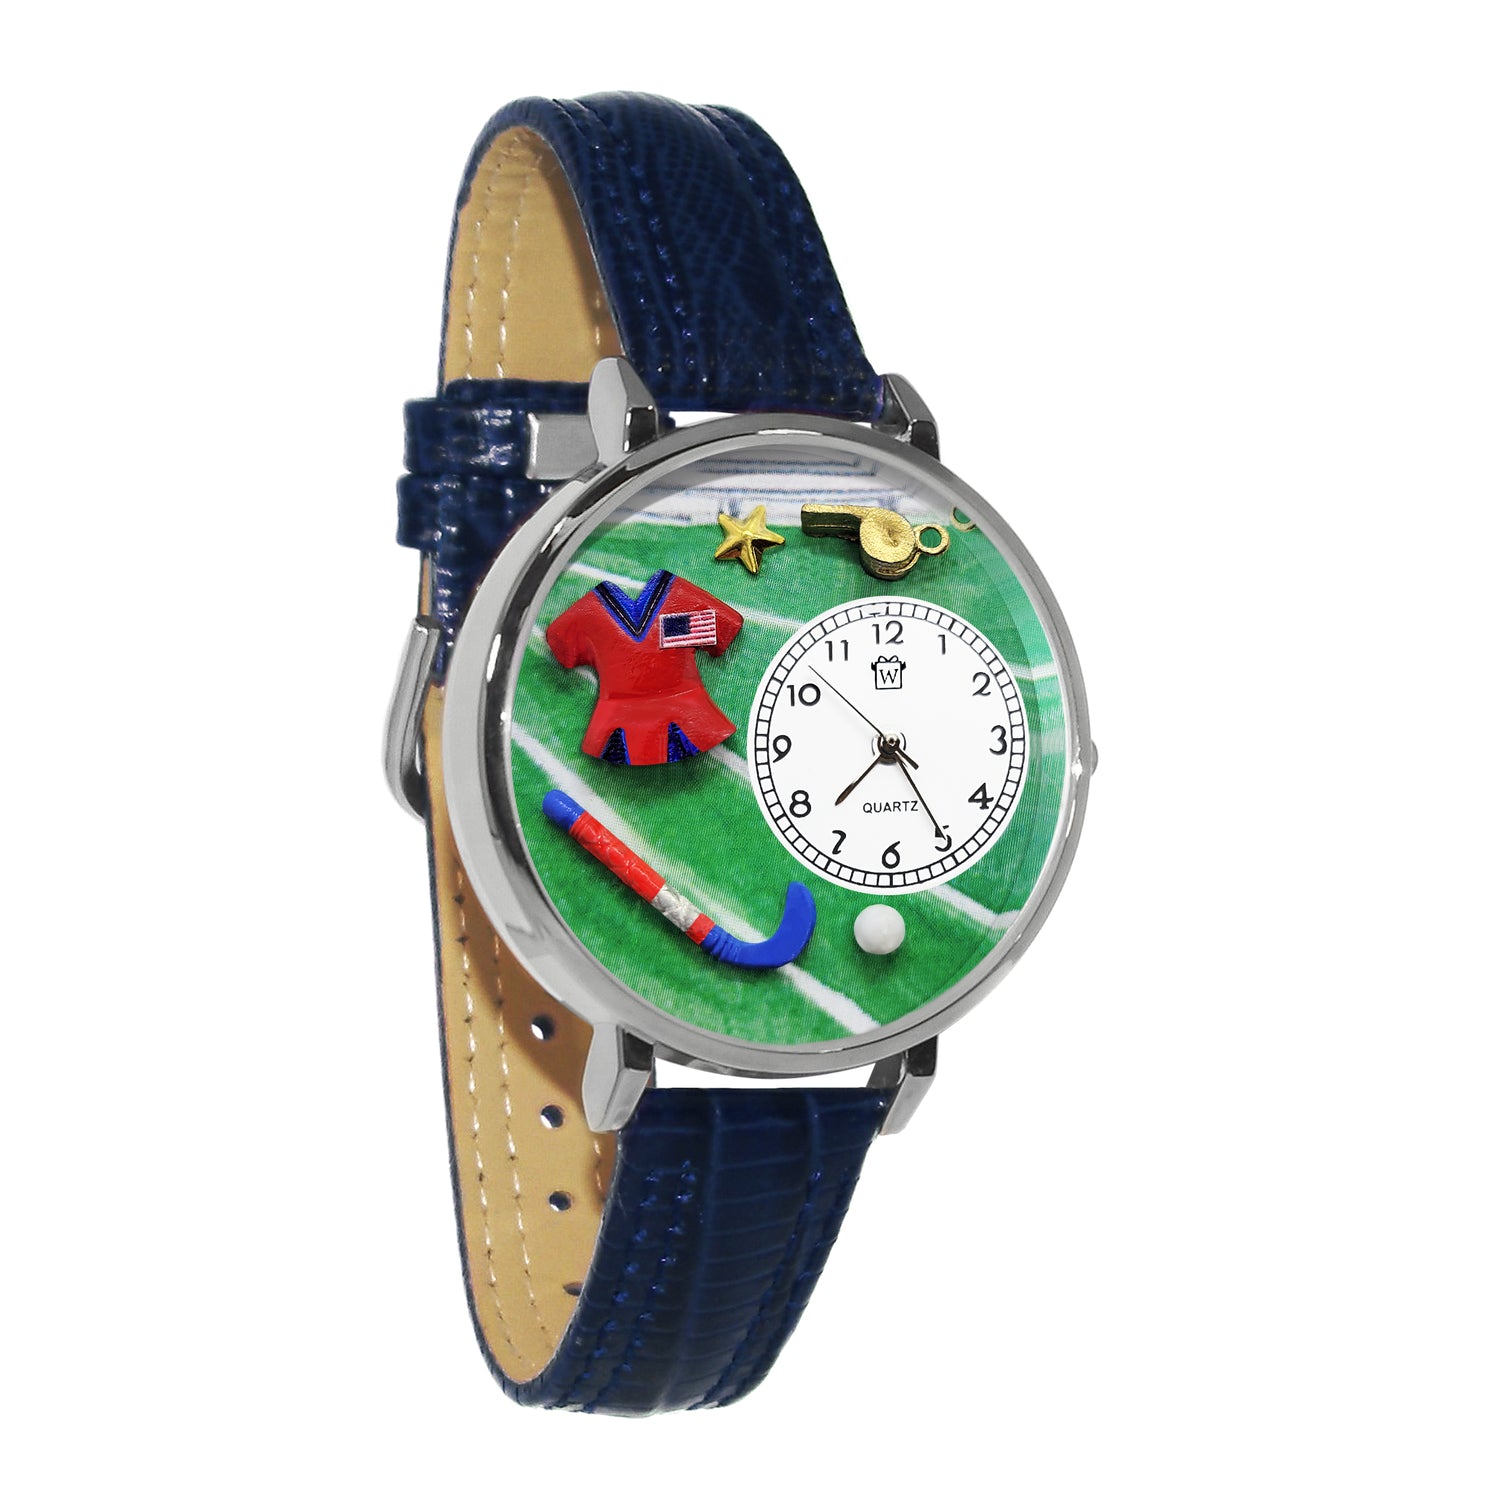 Whimsical Gifts | Field Hockey 3D Watch Large Style | Handmade in USA | Hobbies & Special Interests | Sports | Novelty Unique Fun Miniatures Gift | Silver Finish Navy Blue Leather Watch Band